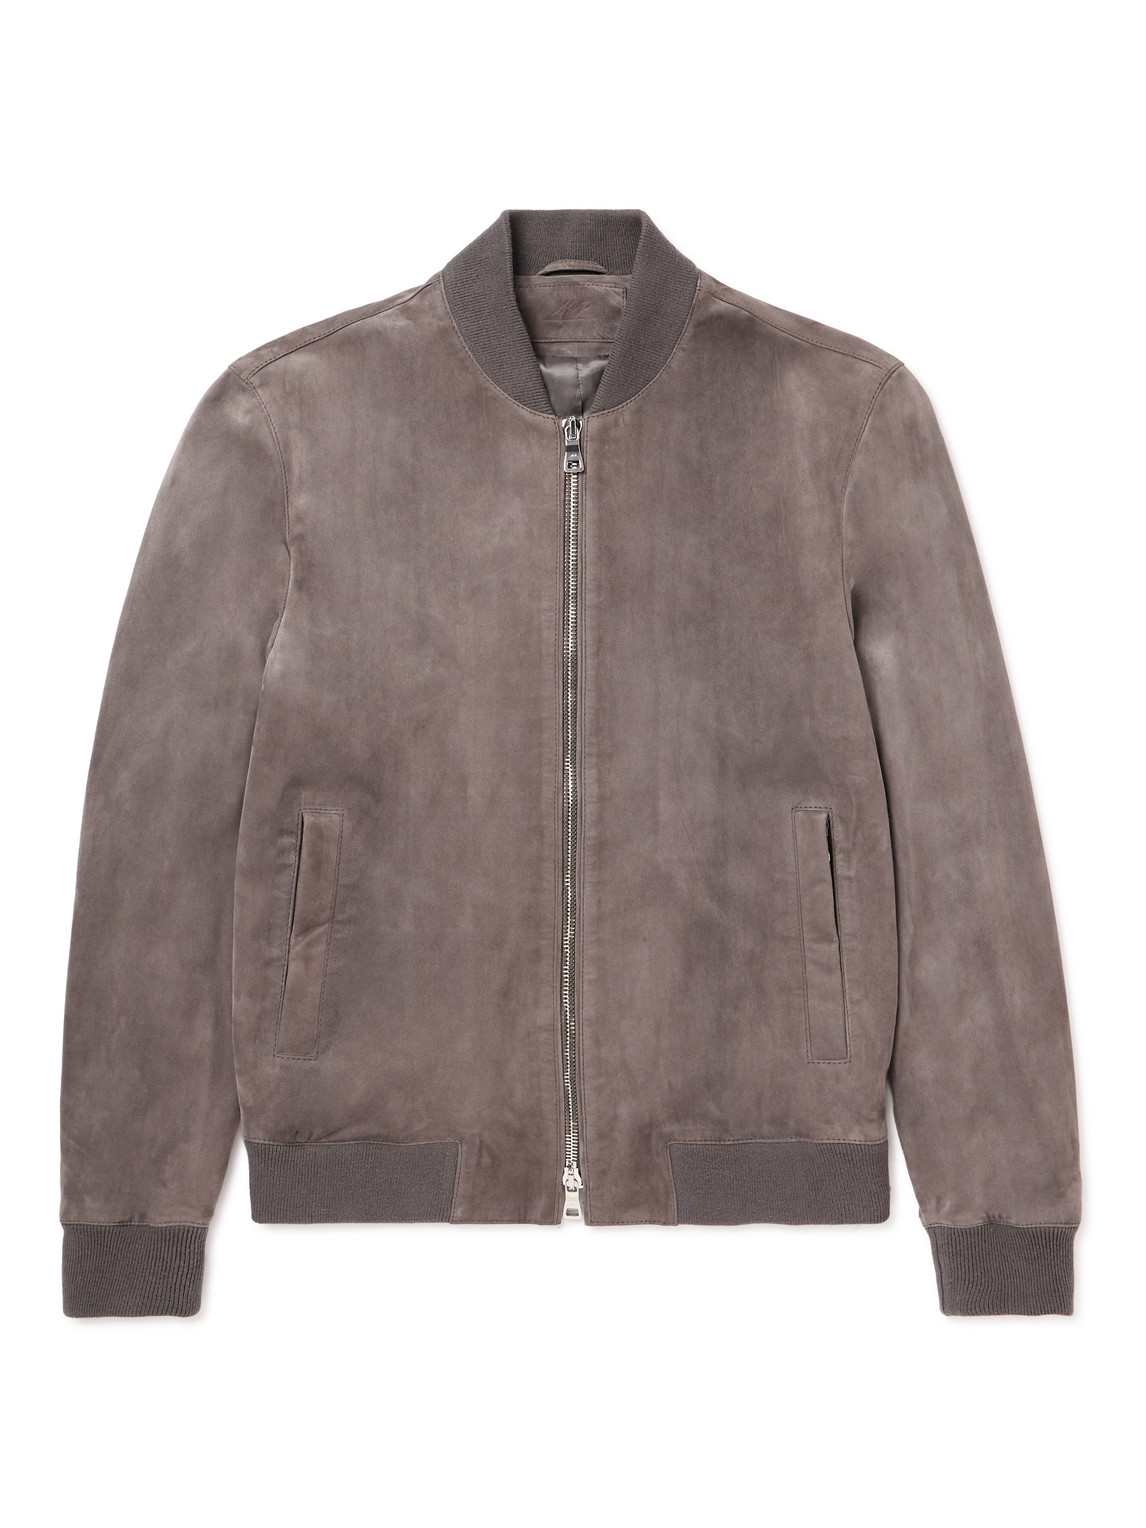 Mr P Suede Bomber Jacket In Unknown